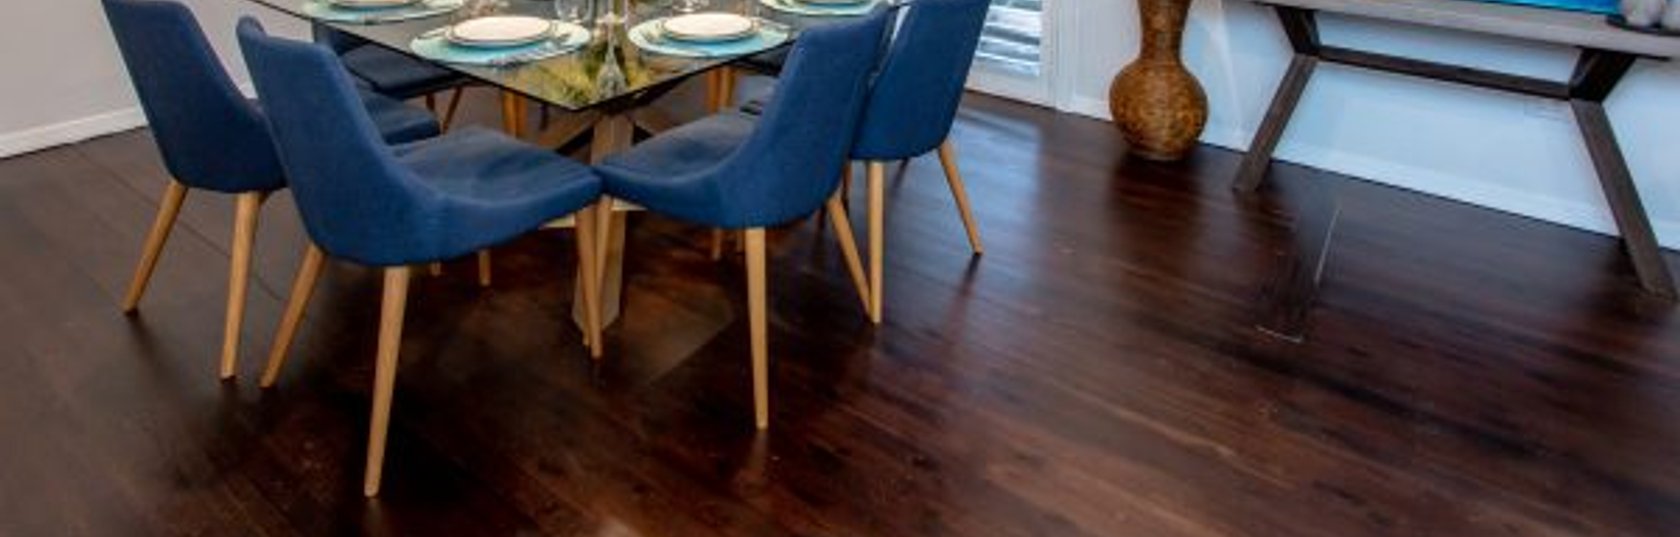 Timber floor – which one should I choose?